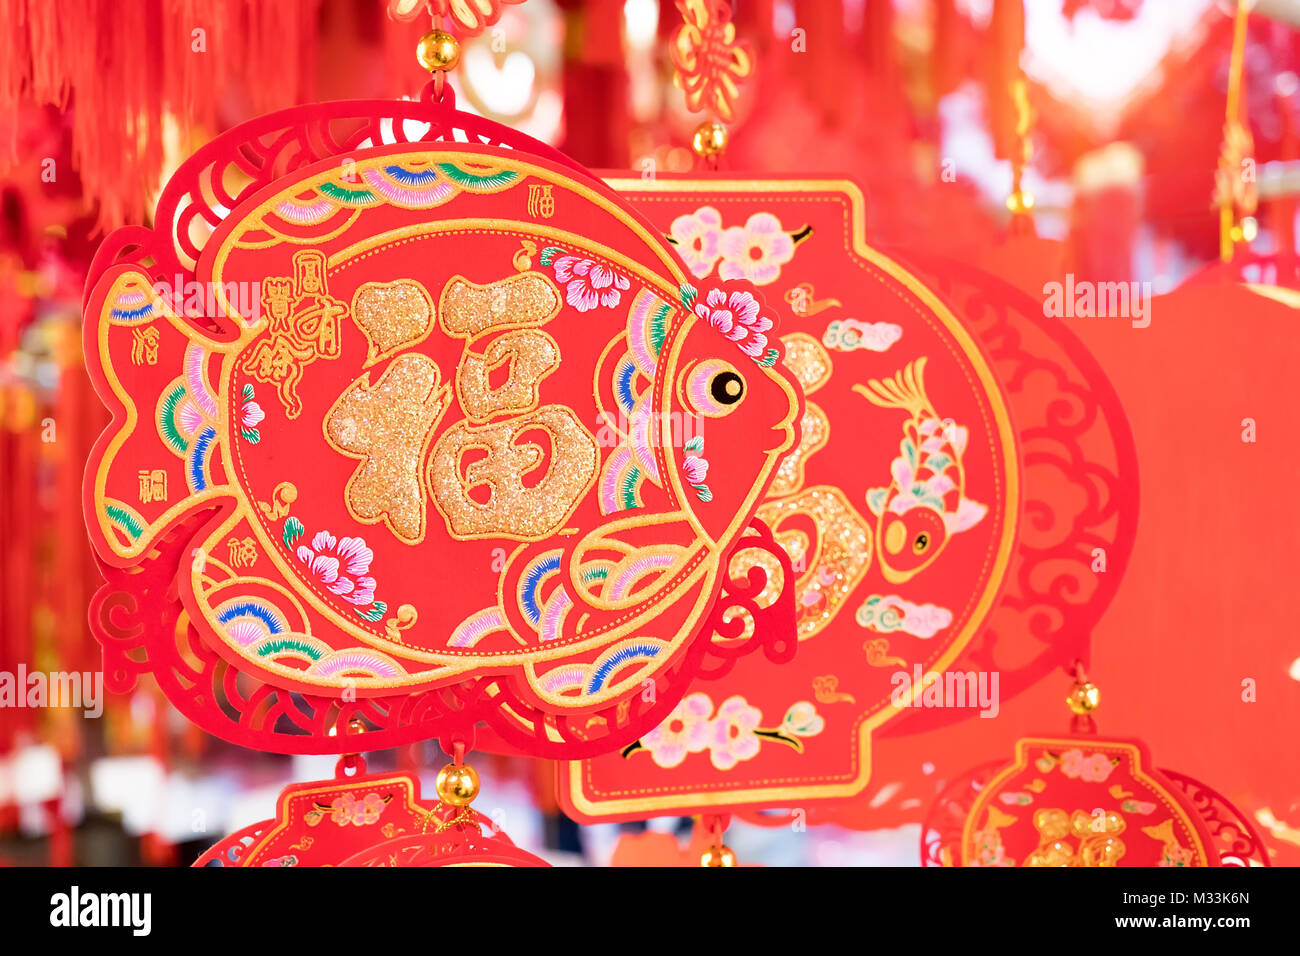 Tradition decoration of Chinese,words mean best wishes and good luck for the coming chinese new year Stock Photo